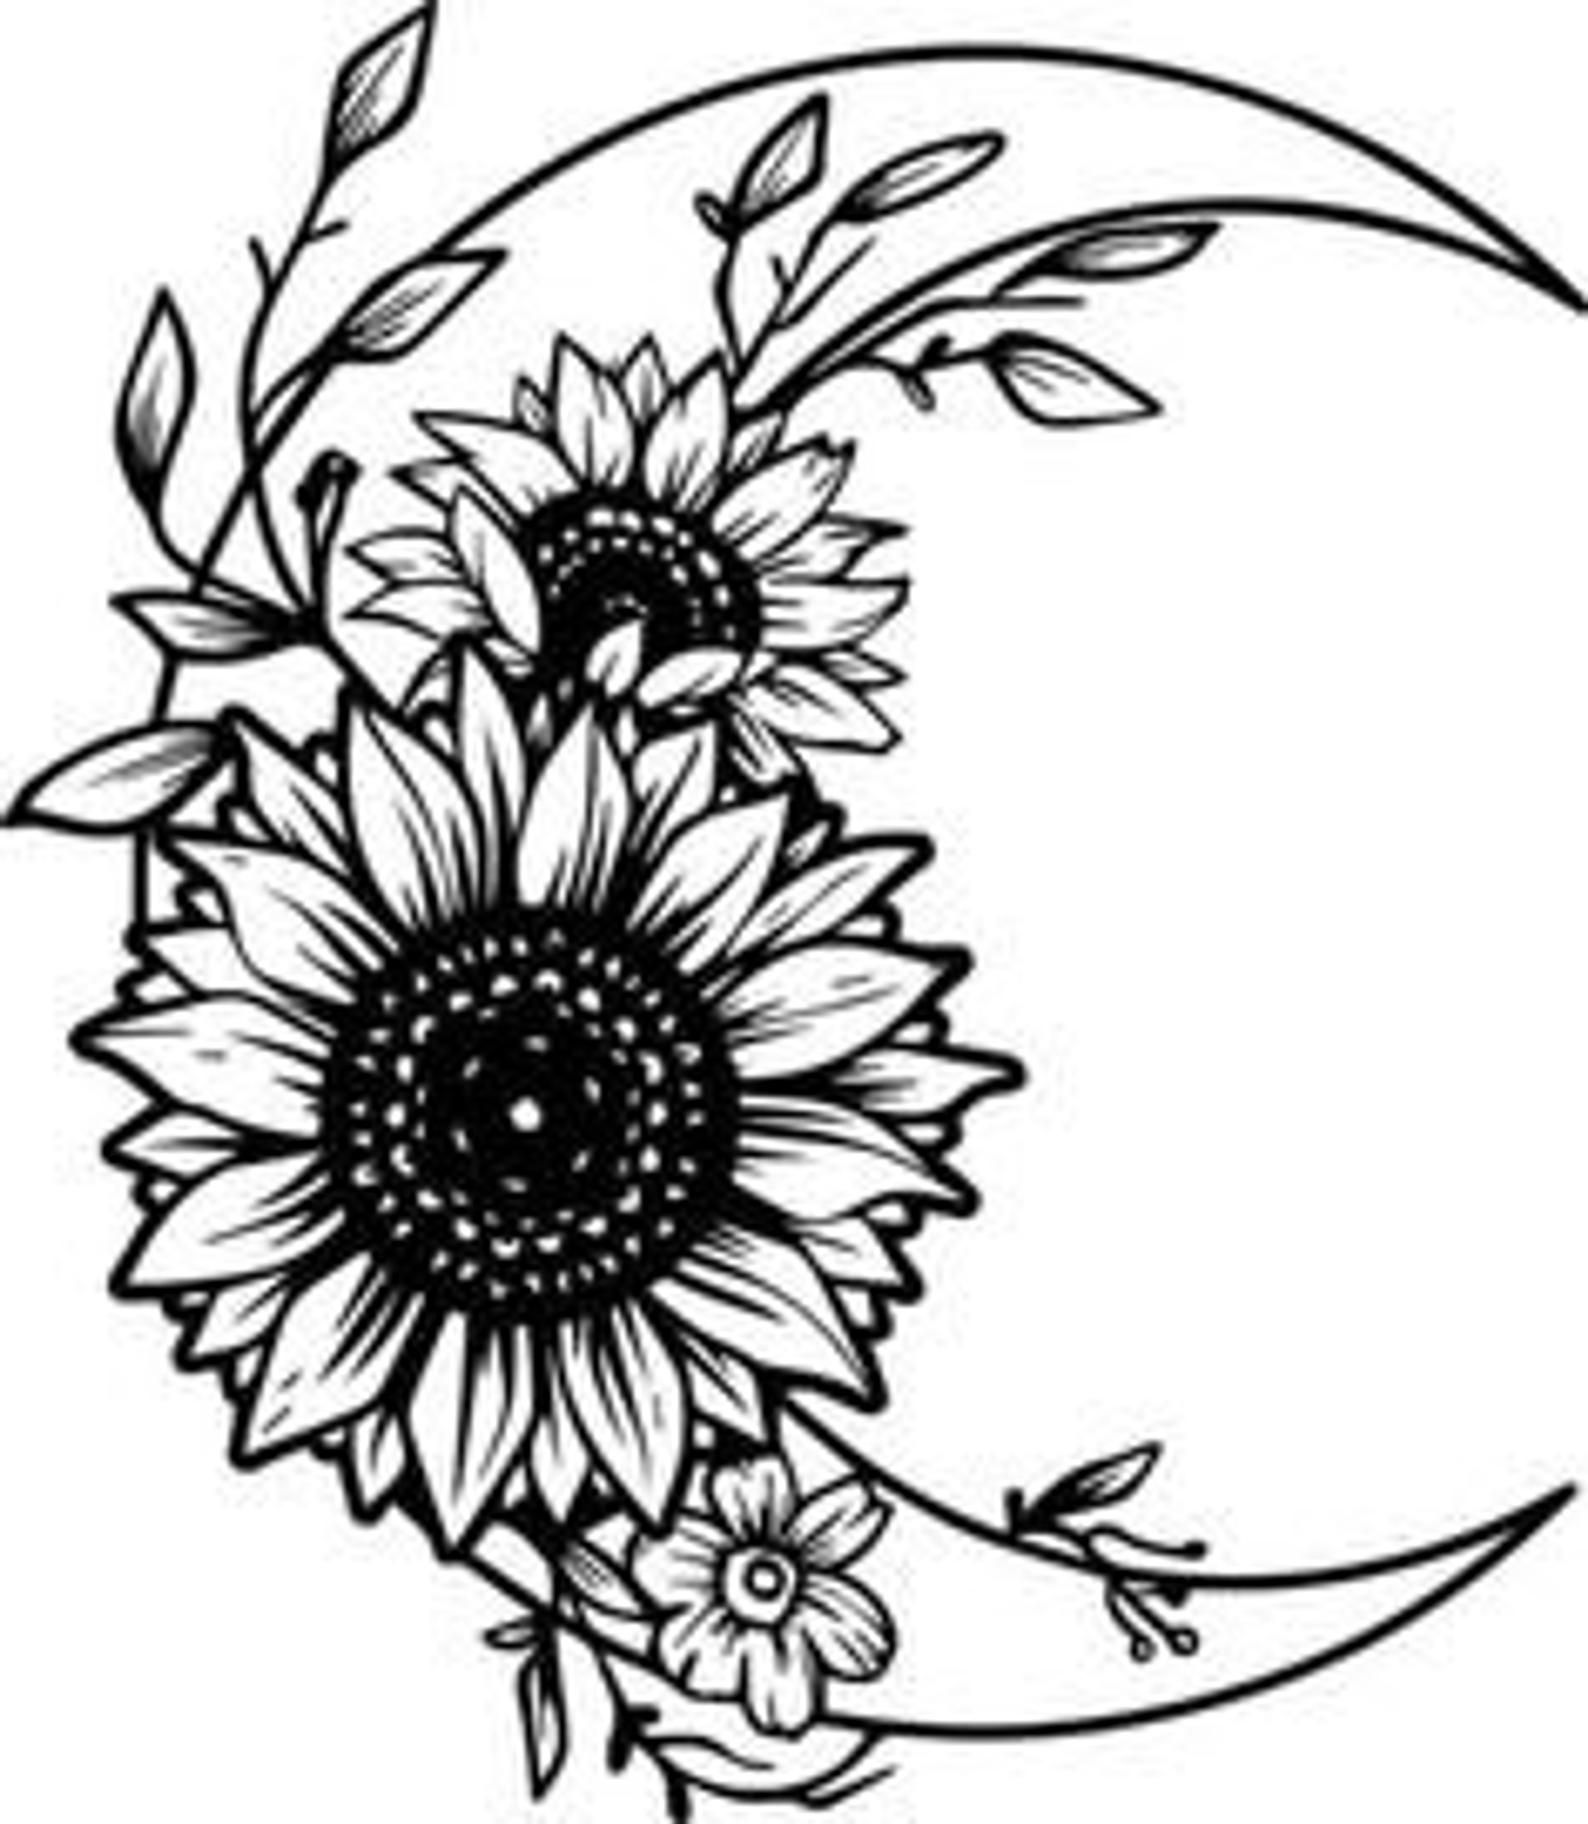 crescent moon with sunflowers svg file in 2021 | Cricut vinyl